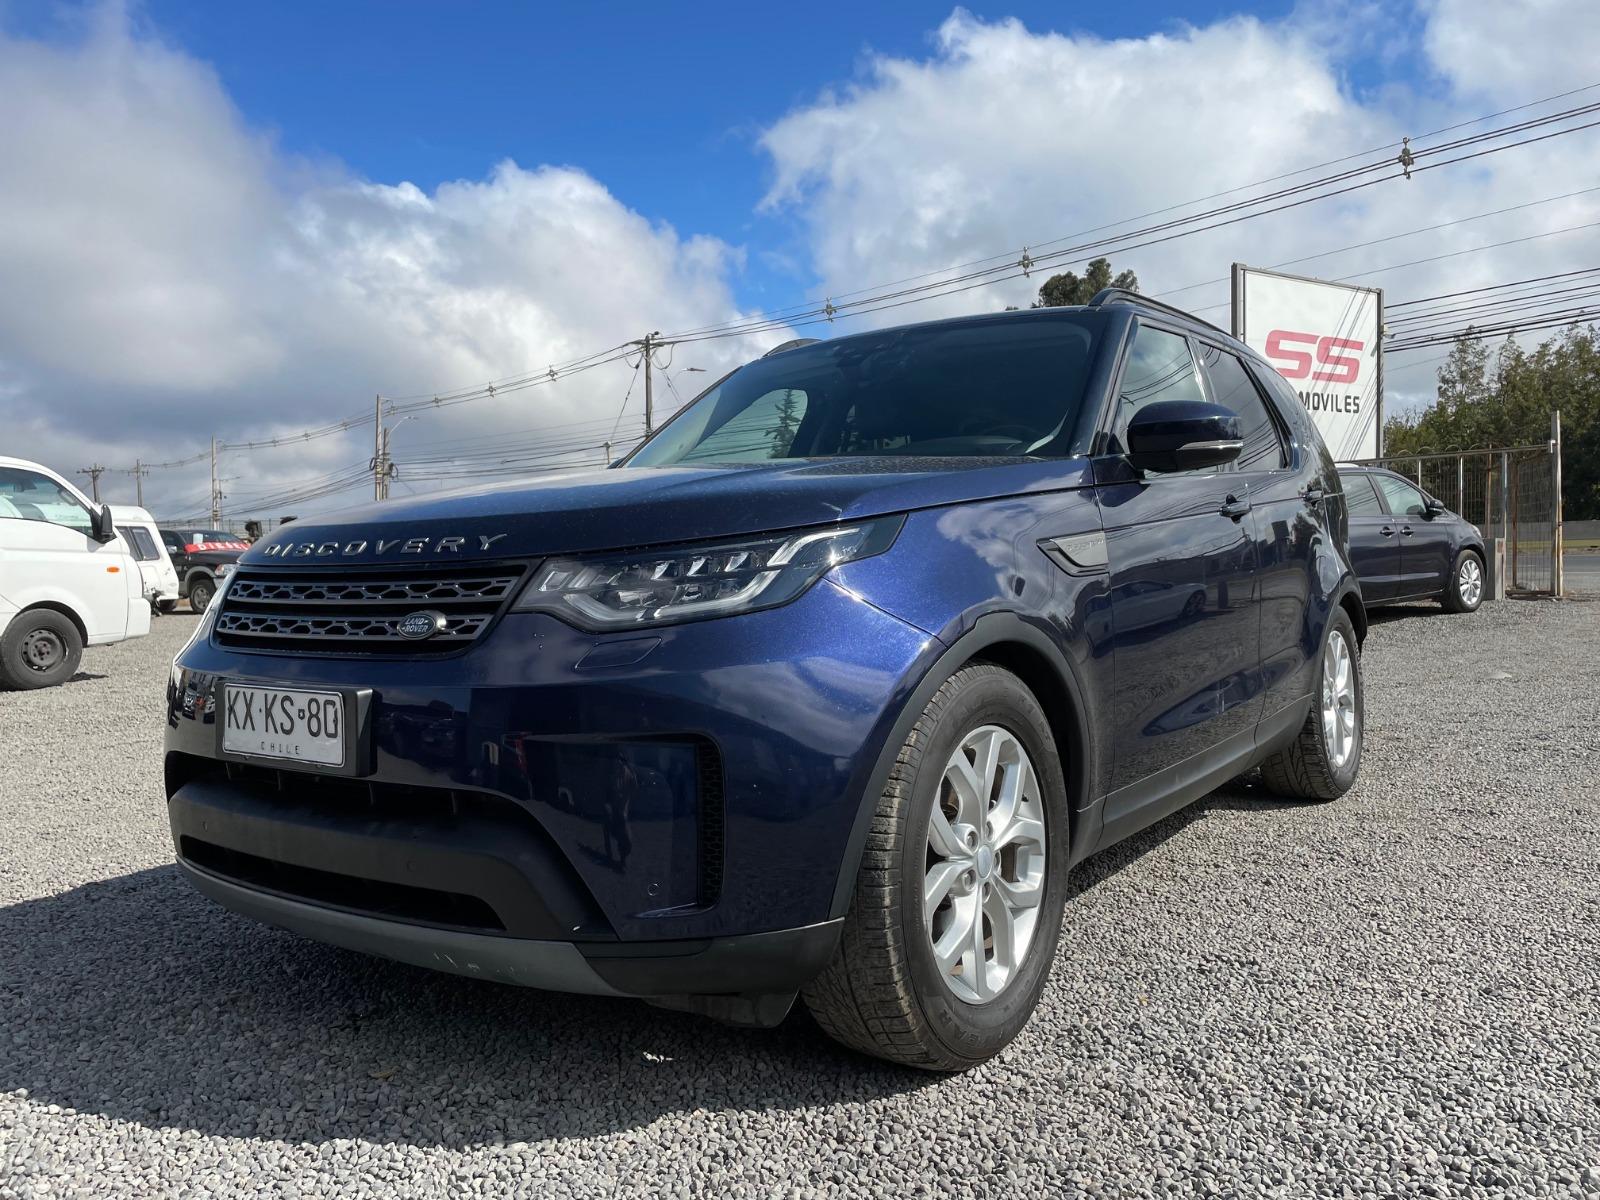 LAND ROVER DISCOVERY 4X4 2.0 AT 2019 Land Rover Discovery - FULL MOTOR